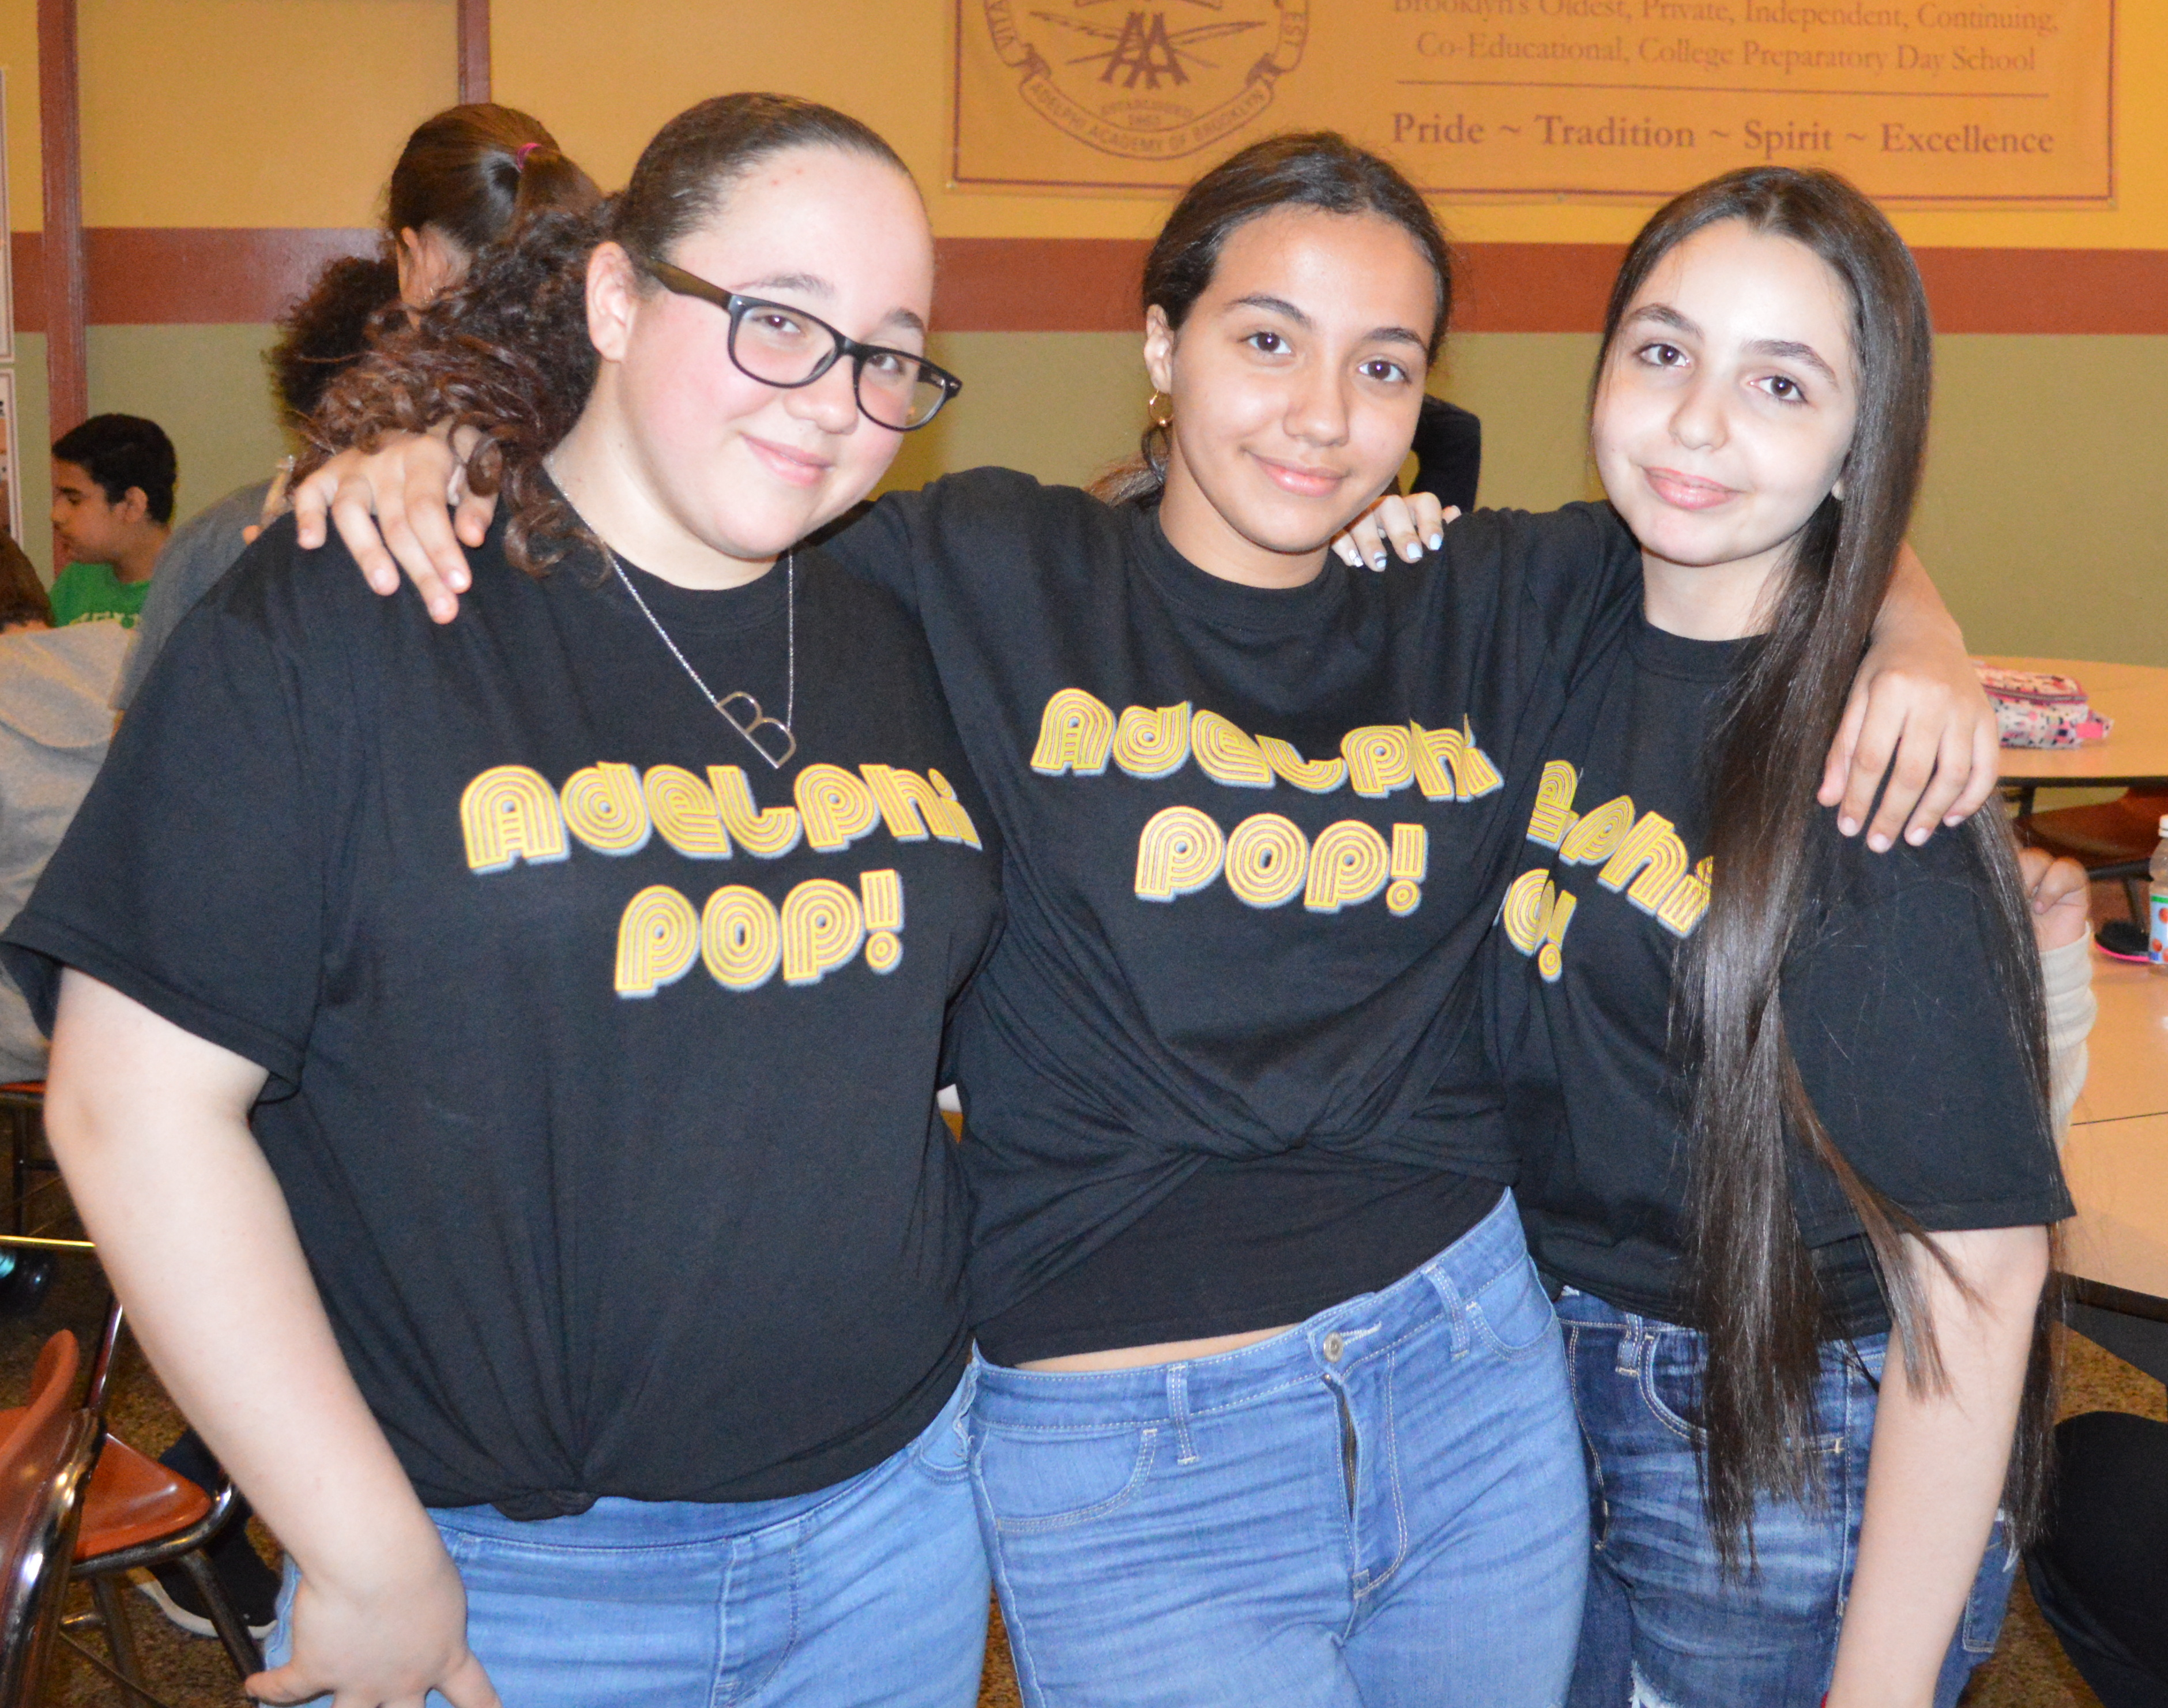 The official "Adelphi Pop!" T-shirt were a big hit on Pop Day!